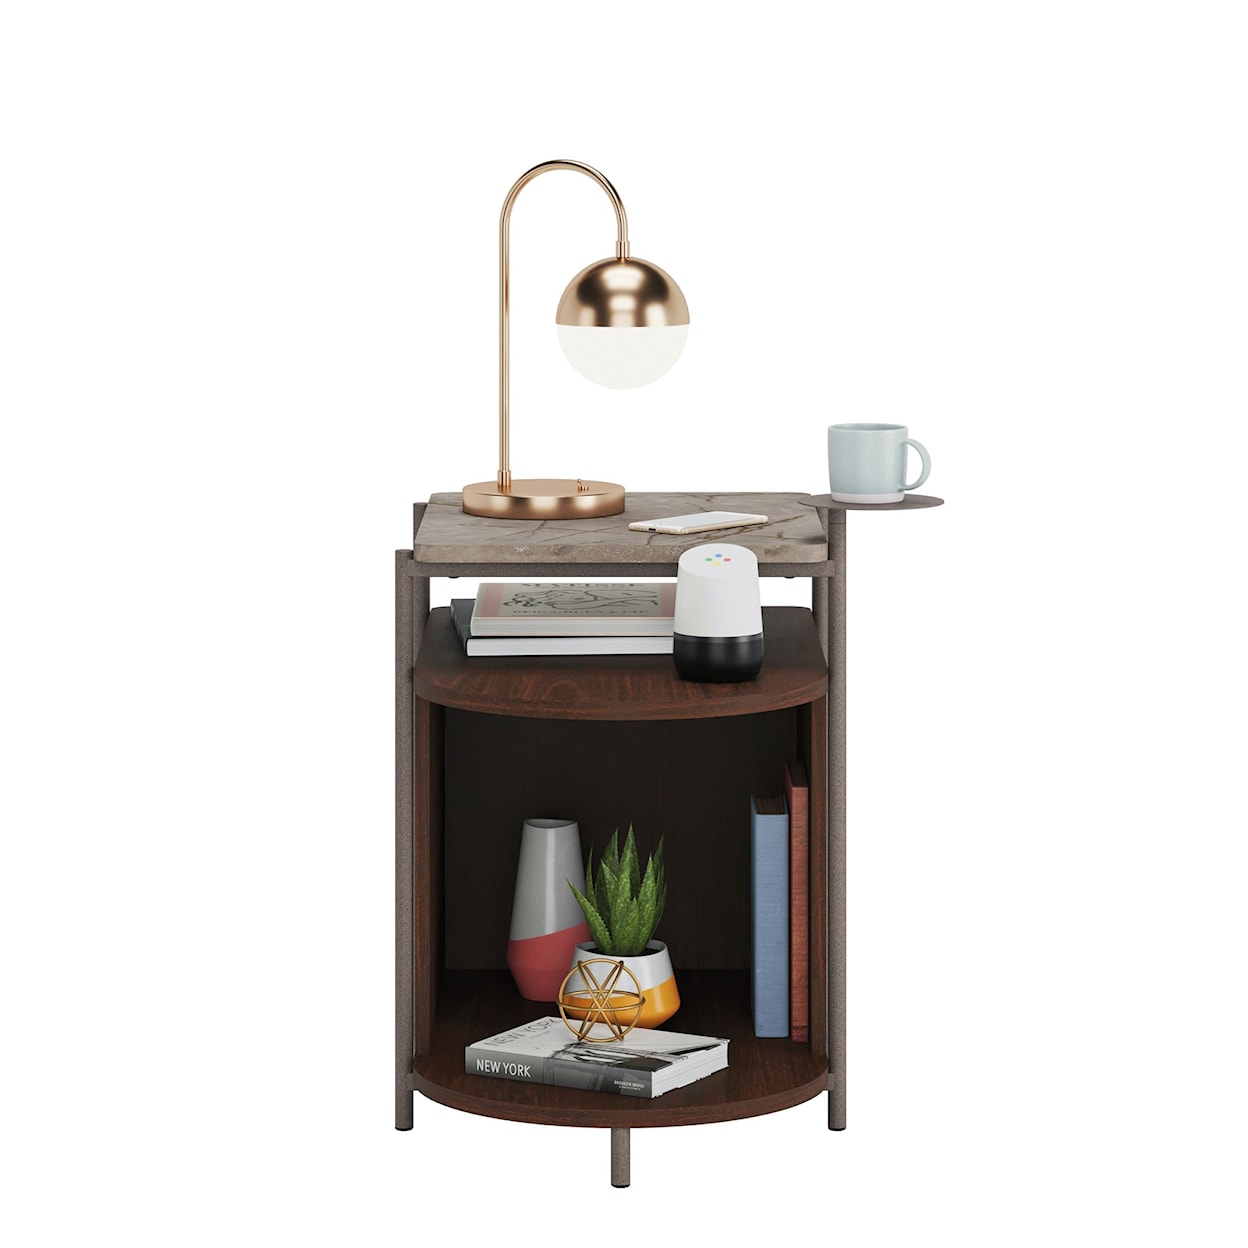 Sauder Radial Radial End Table Uw 3a